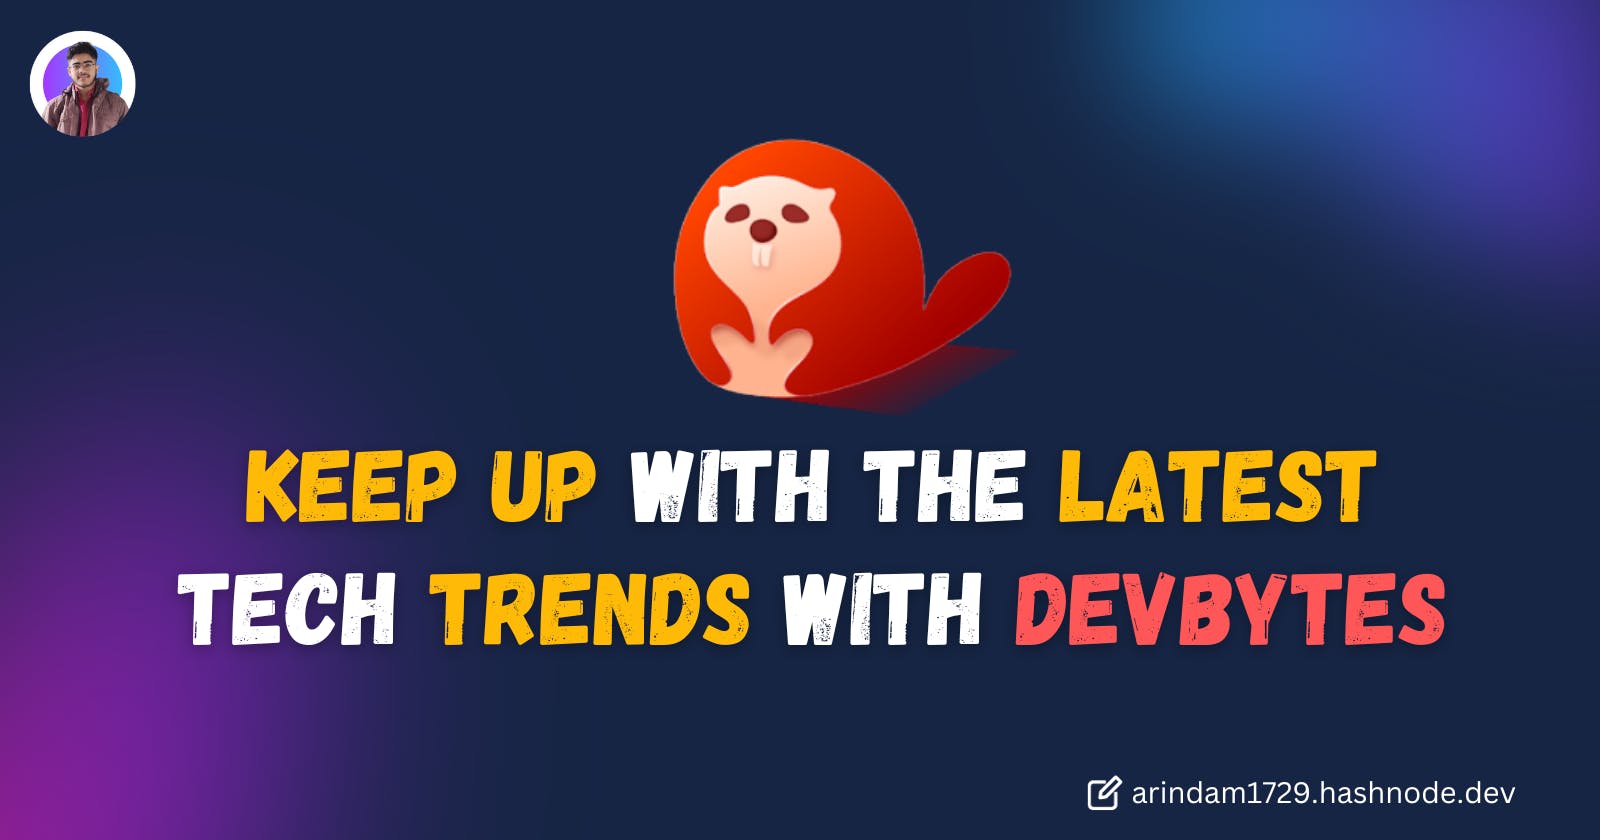 Keep Up with the Latest Tech Trends with DevBytes